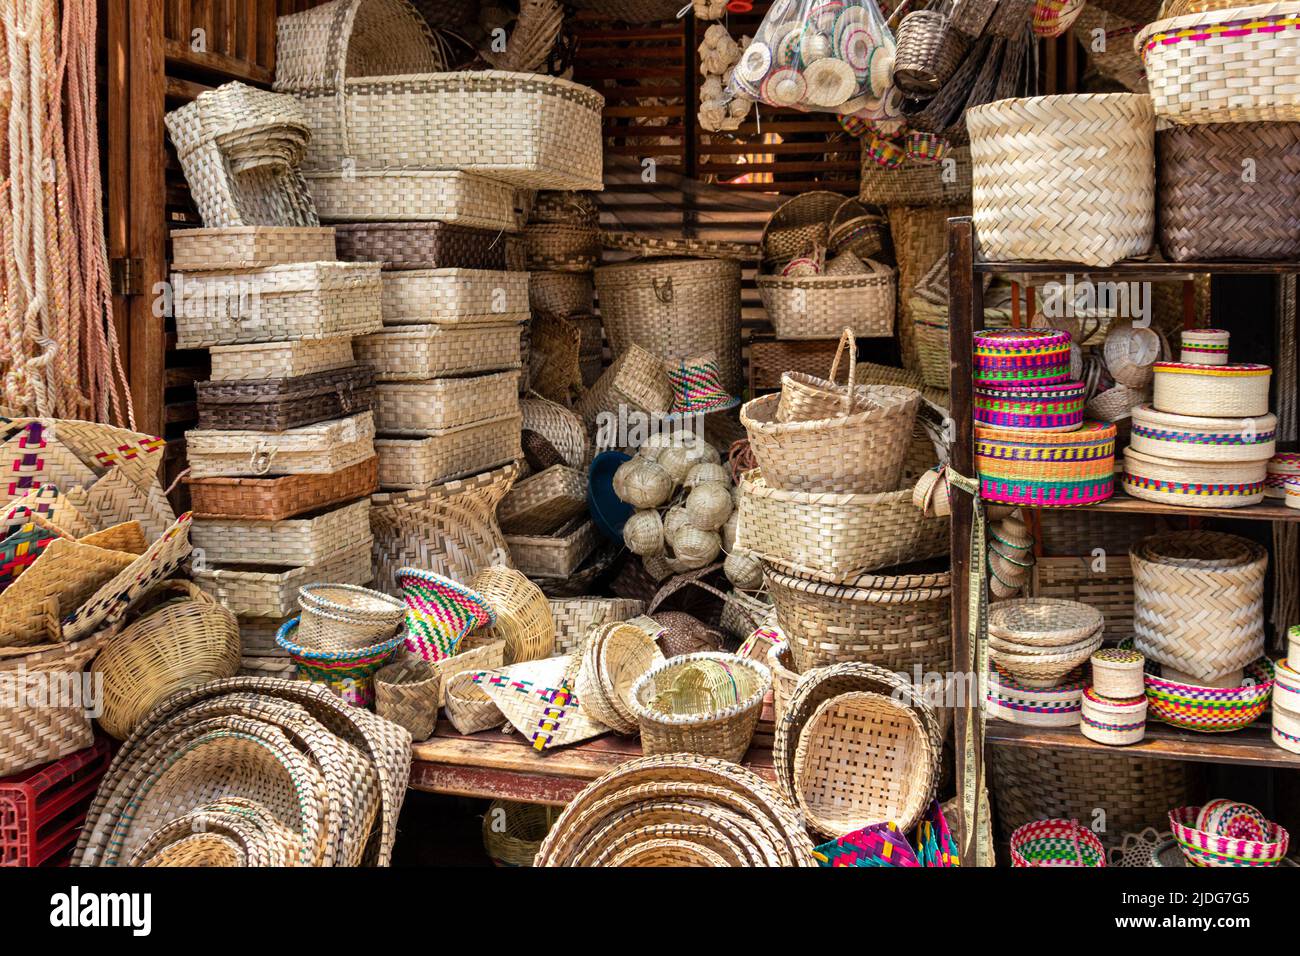 A pile of handmade traditional woven baskets made from straw, natural fiber, for sale at the outdoor market in Cuenca, Ecuador Stock Photo